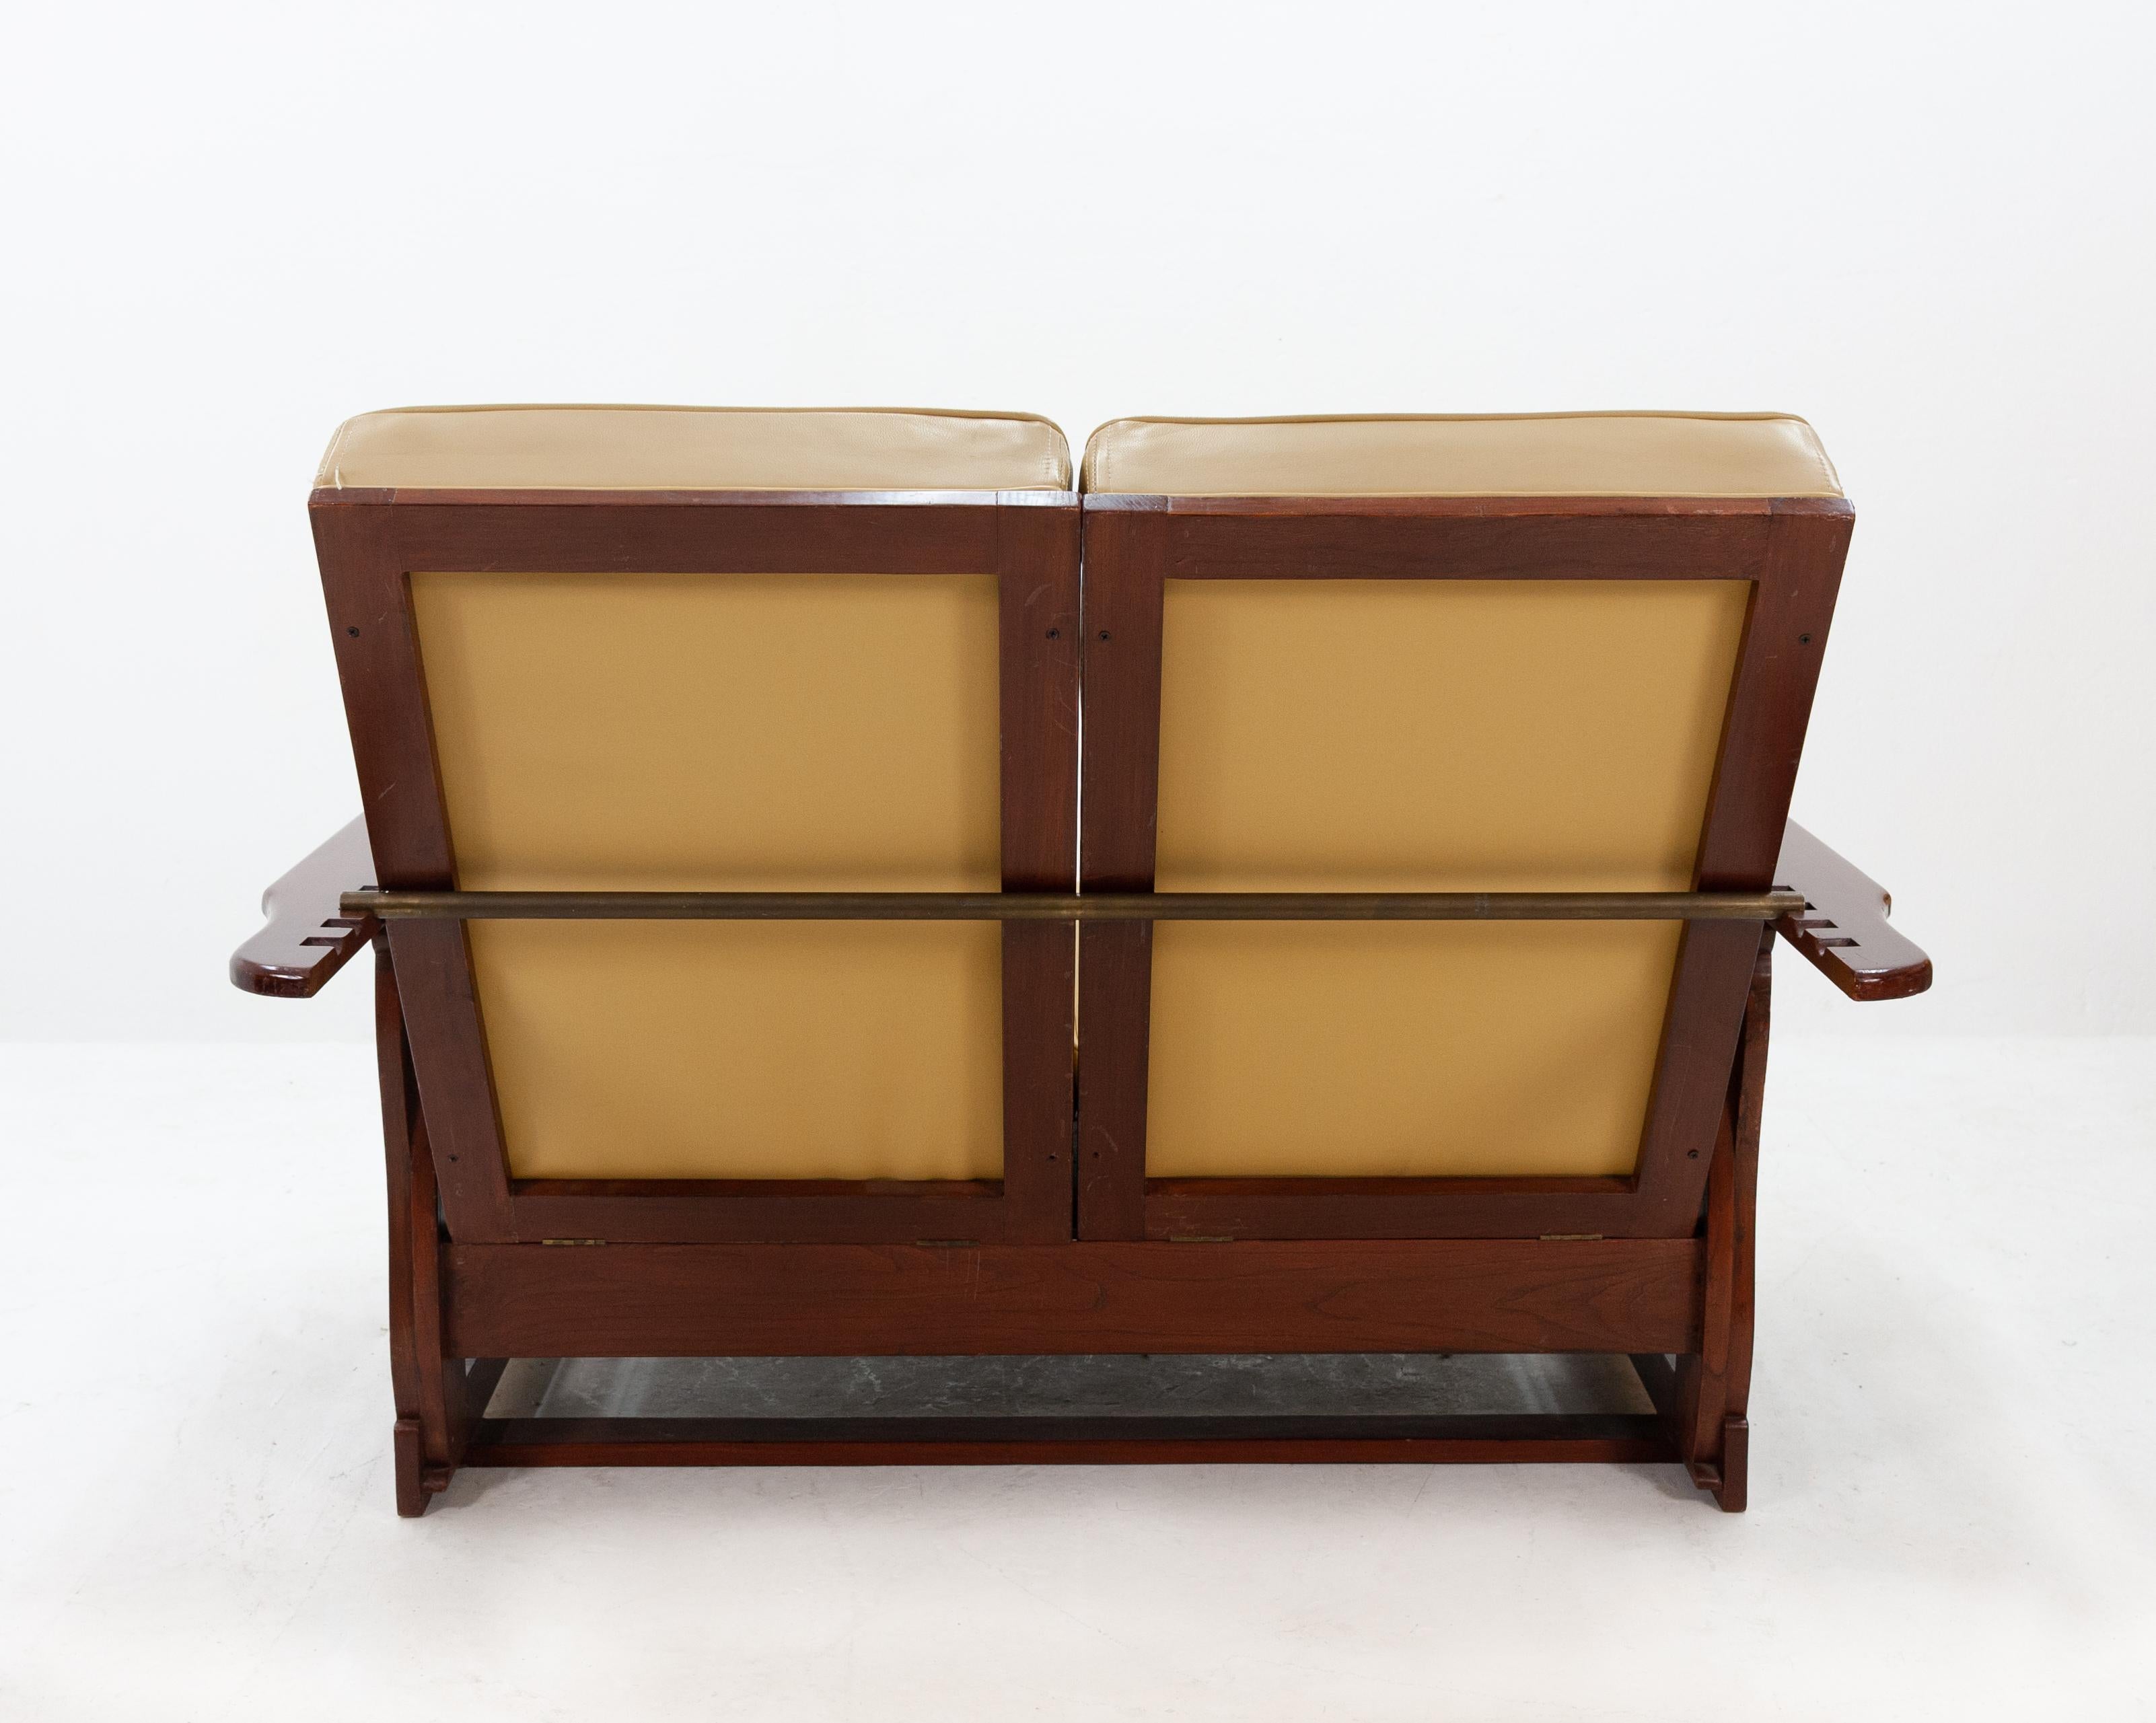 Art Deco A  Morris chair for two  double Sofa recliner  